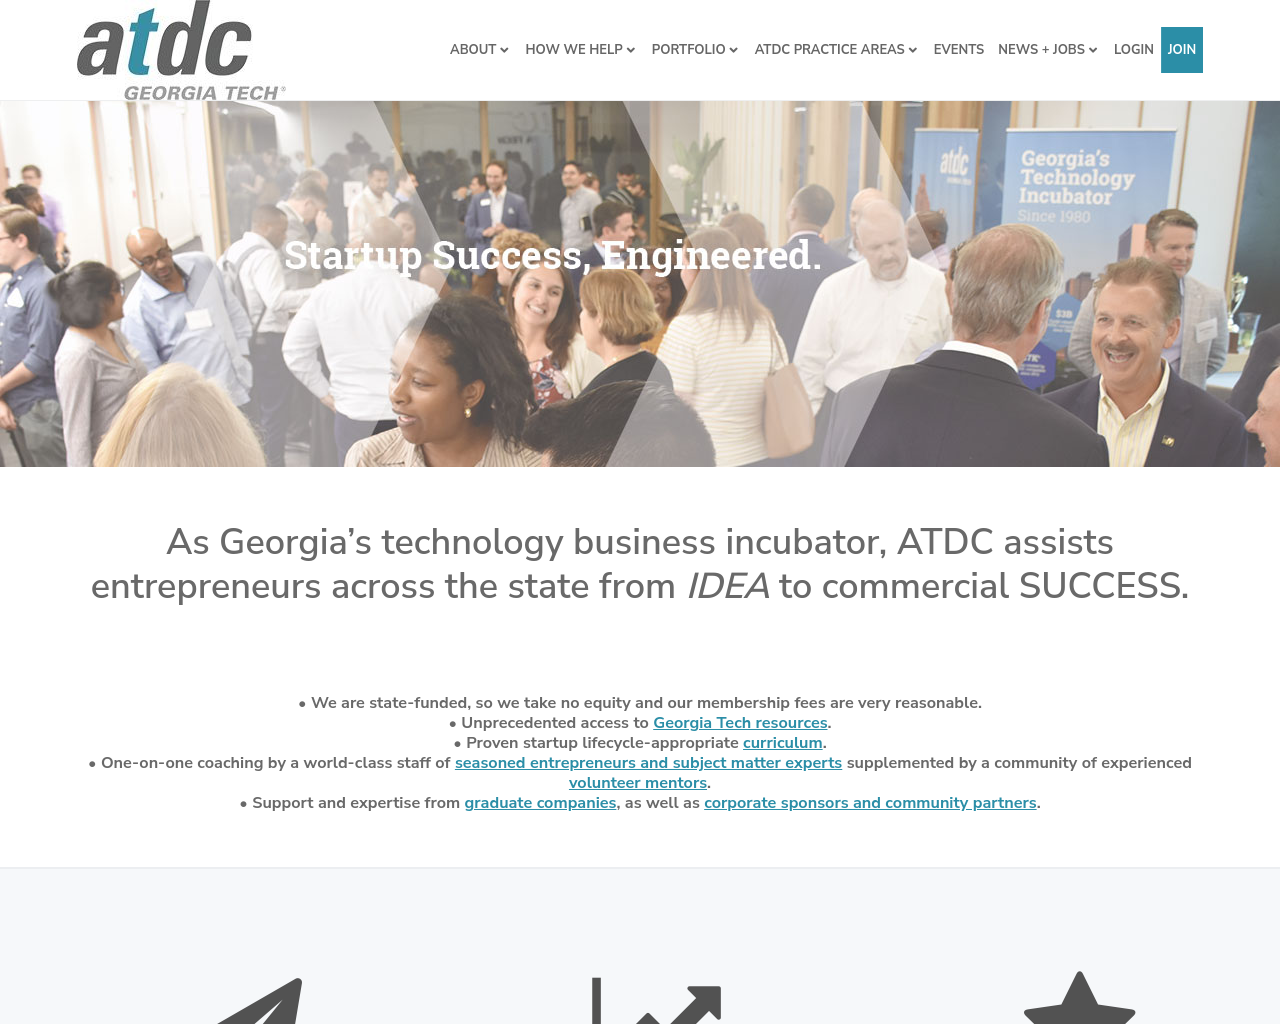 atdc.org